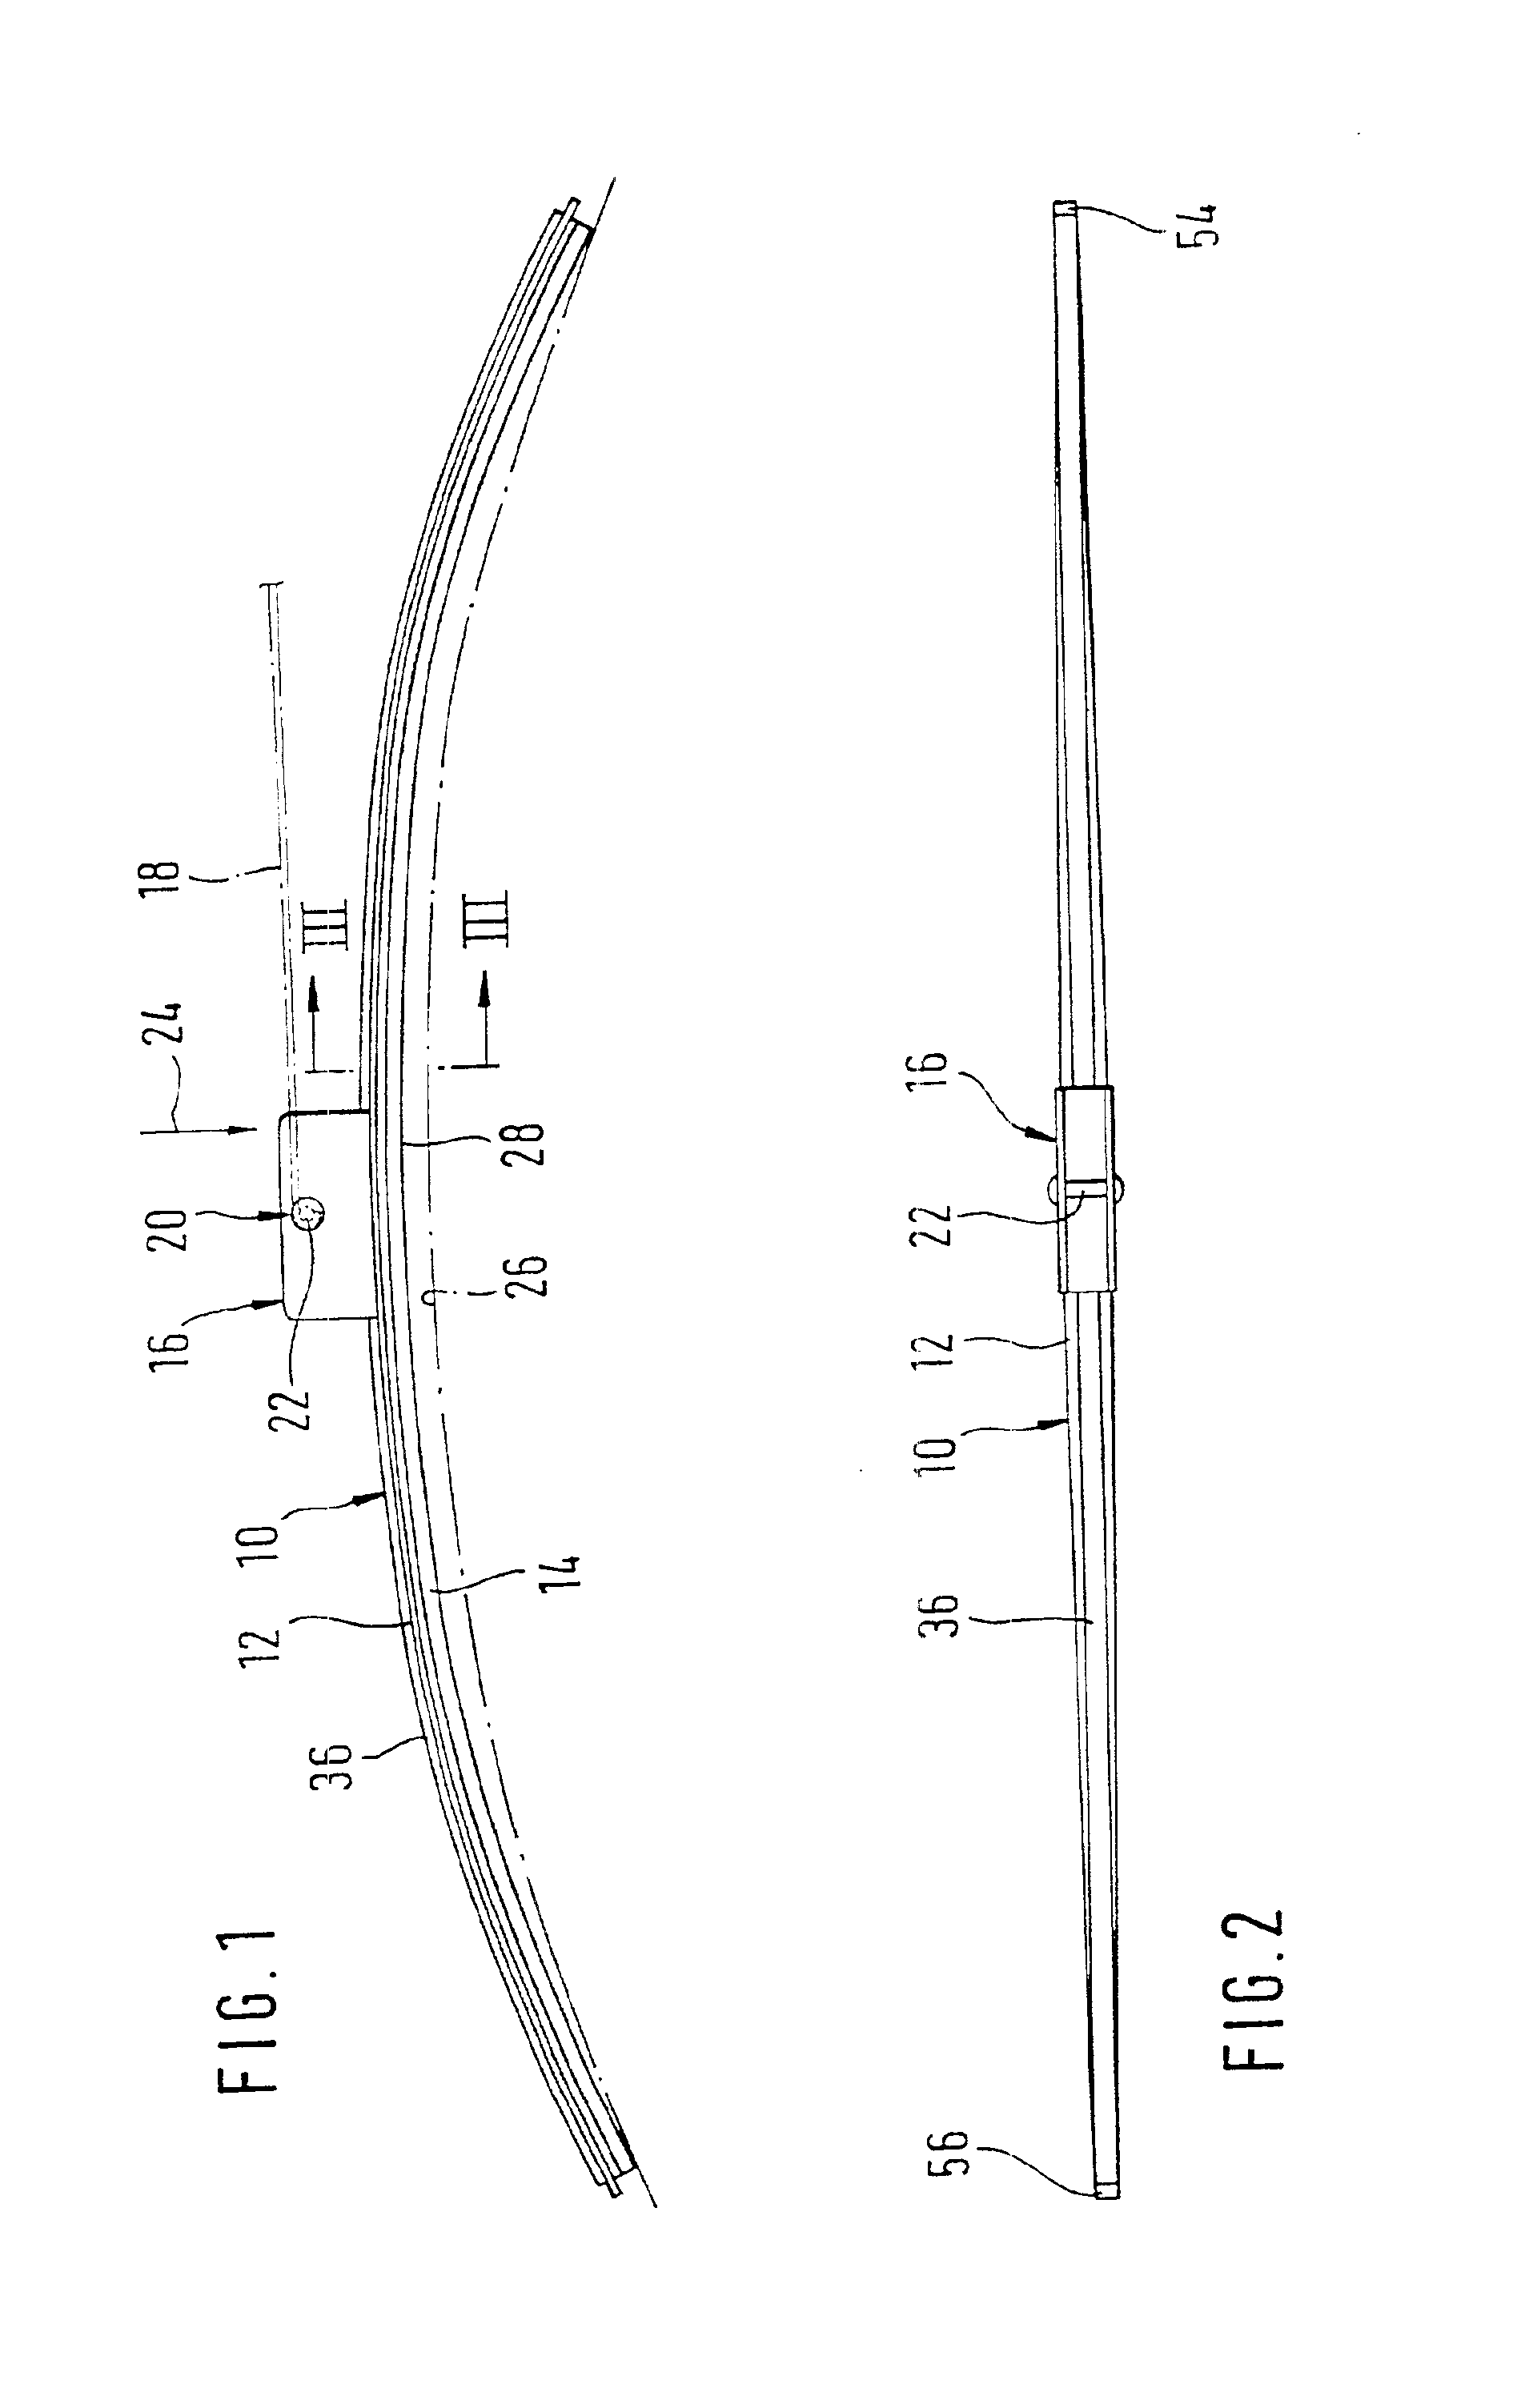 Wiper blade for windows of motor vehicles